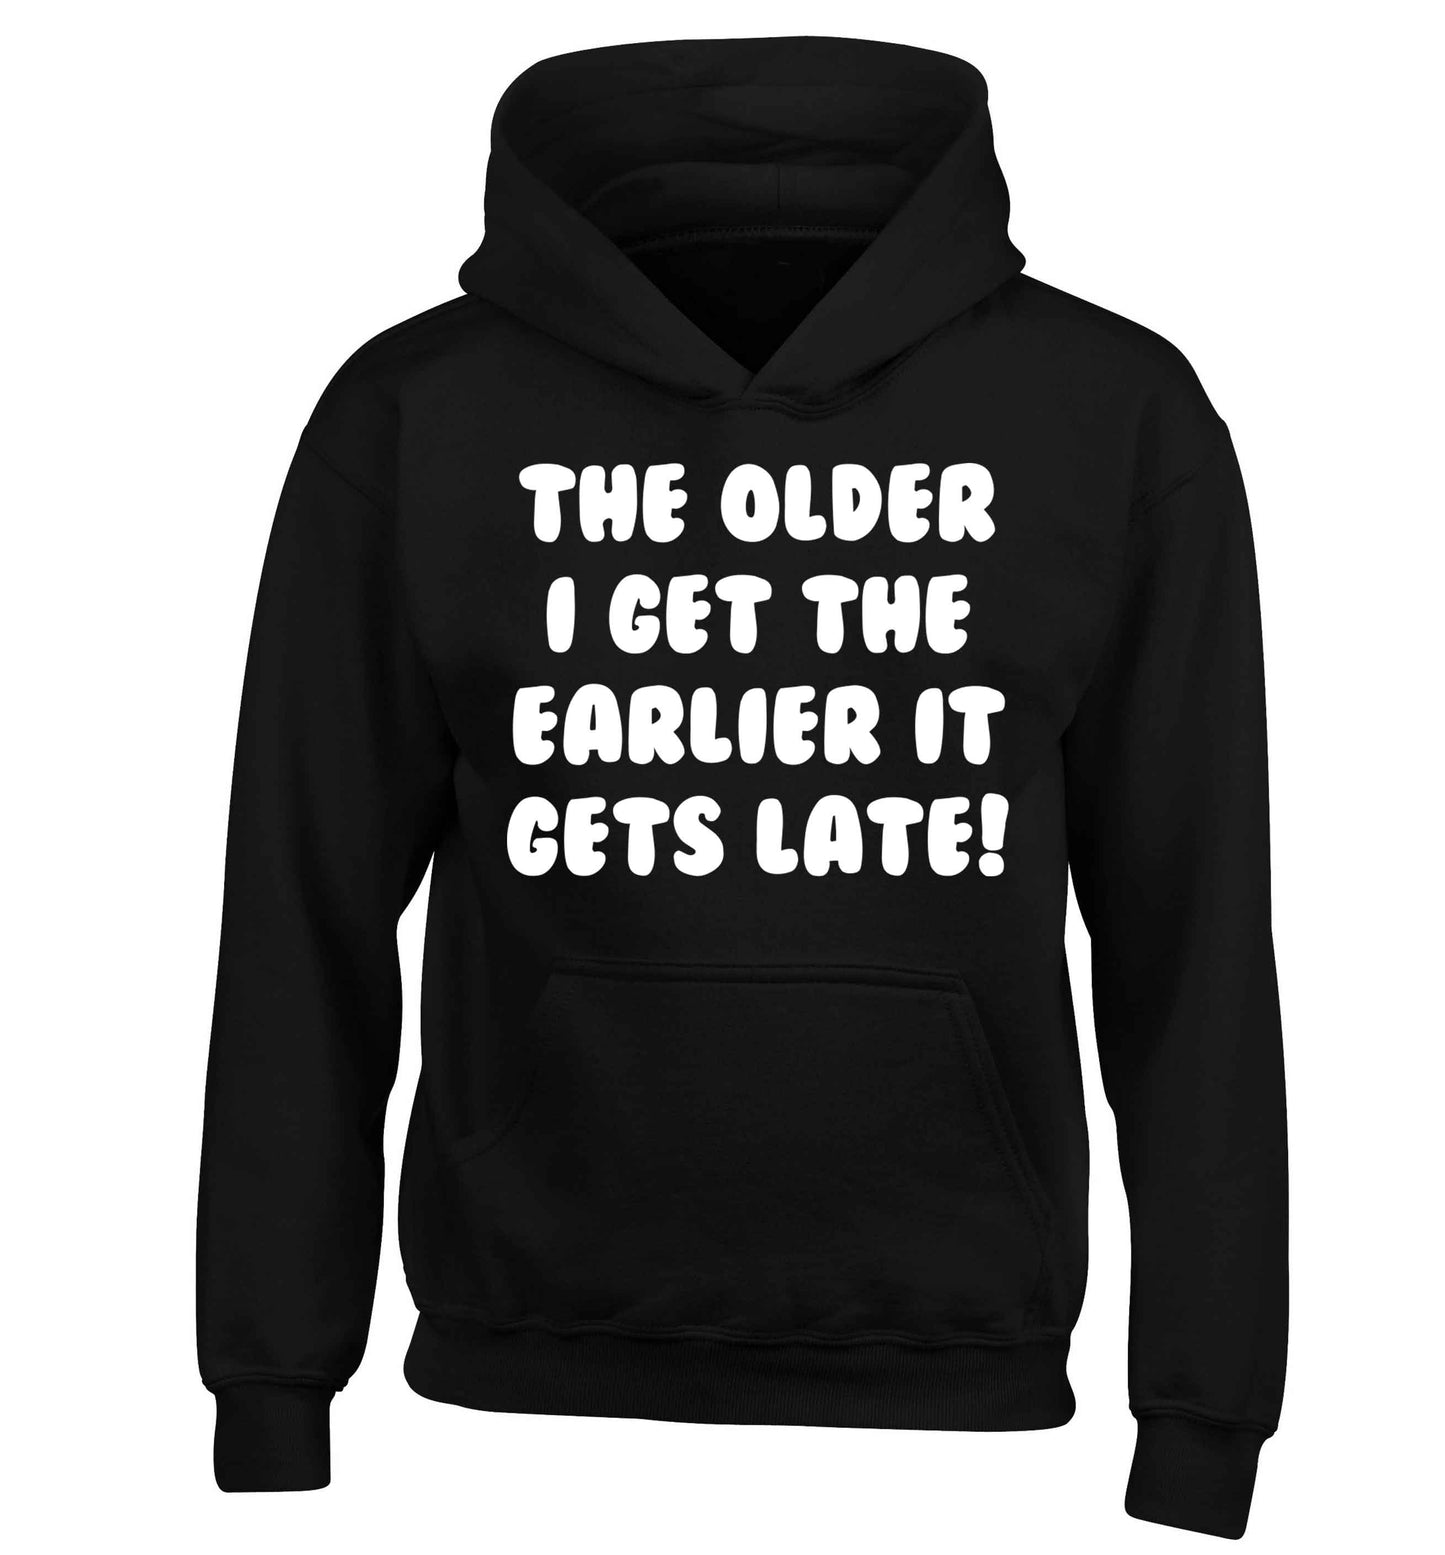 The older I get the earlier it gets late! children's black hoodie 12-13 Years